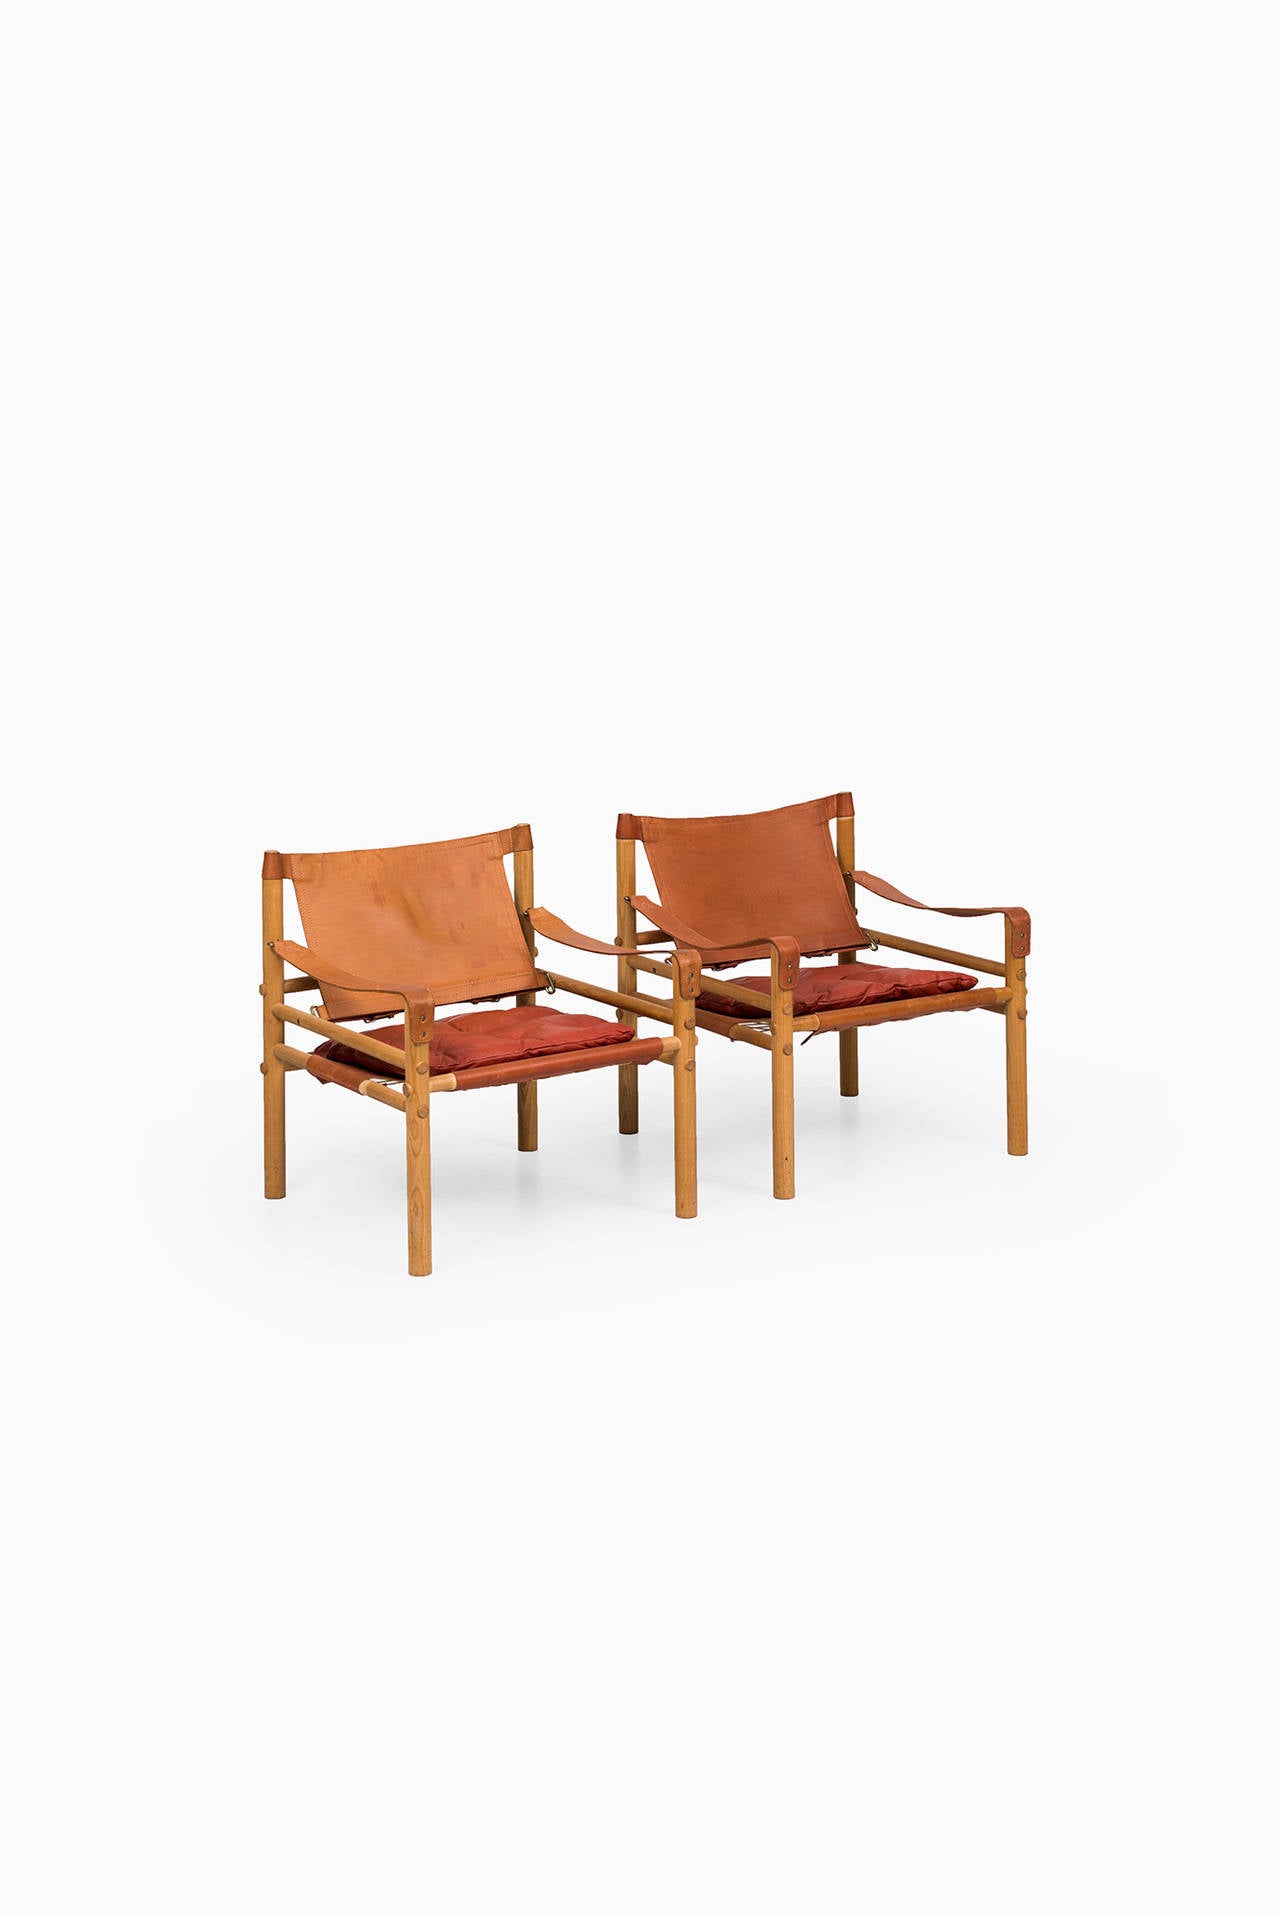 Arne Norell Sirocco Easy Chairs by Norell AB in Sweden 1